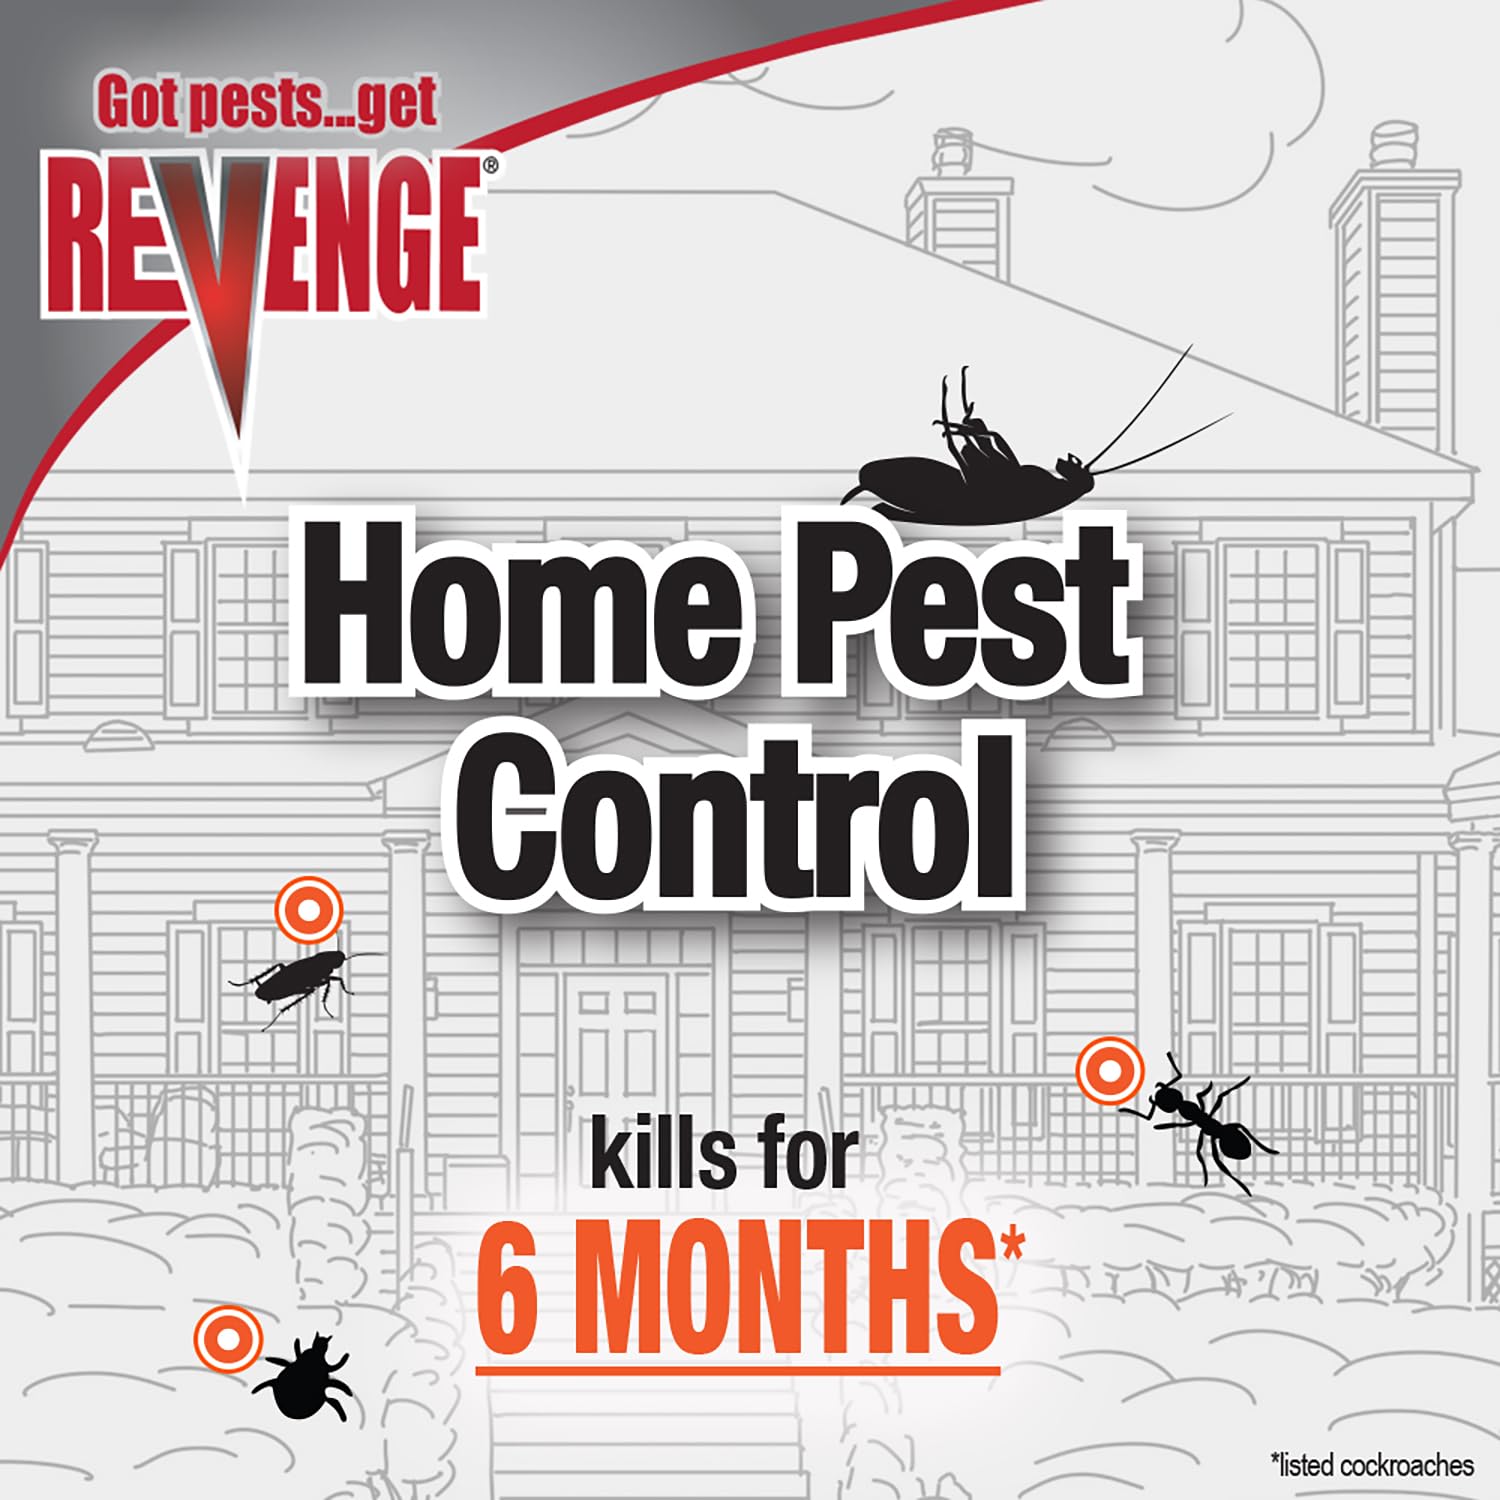 Bonide 4635 Concentrate Revenge Home Pest Control, 18 oz, Long Lasting Protection Kills 500+ Listed Insects, for Indoors and Outdoors